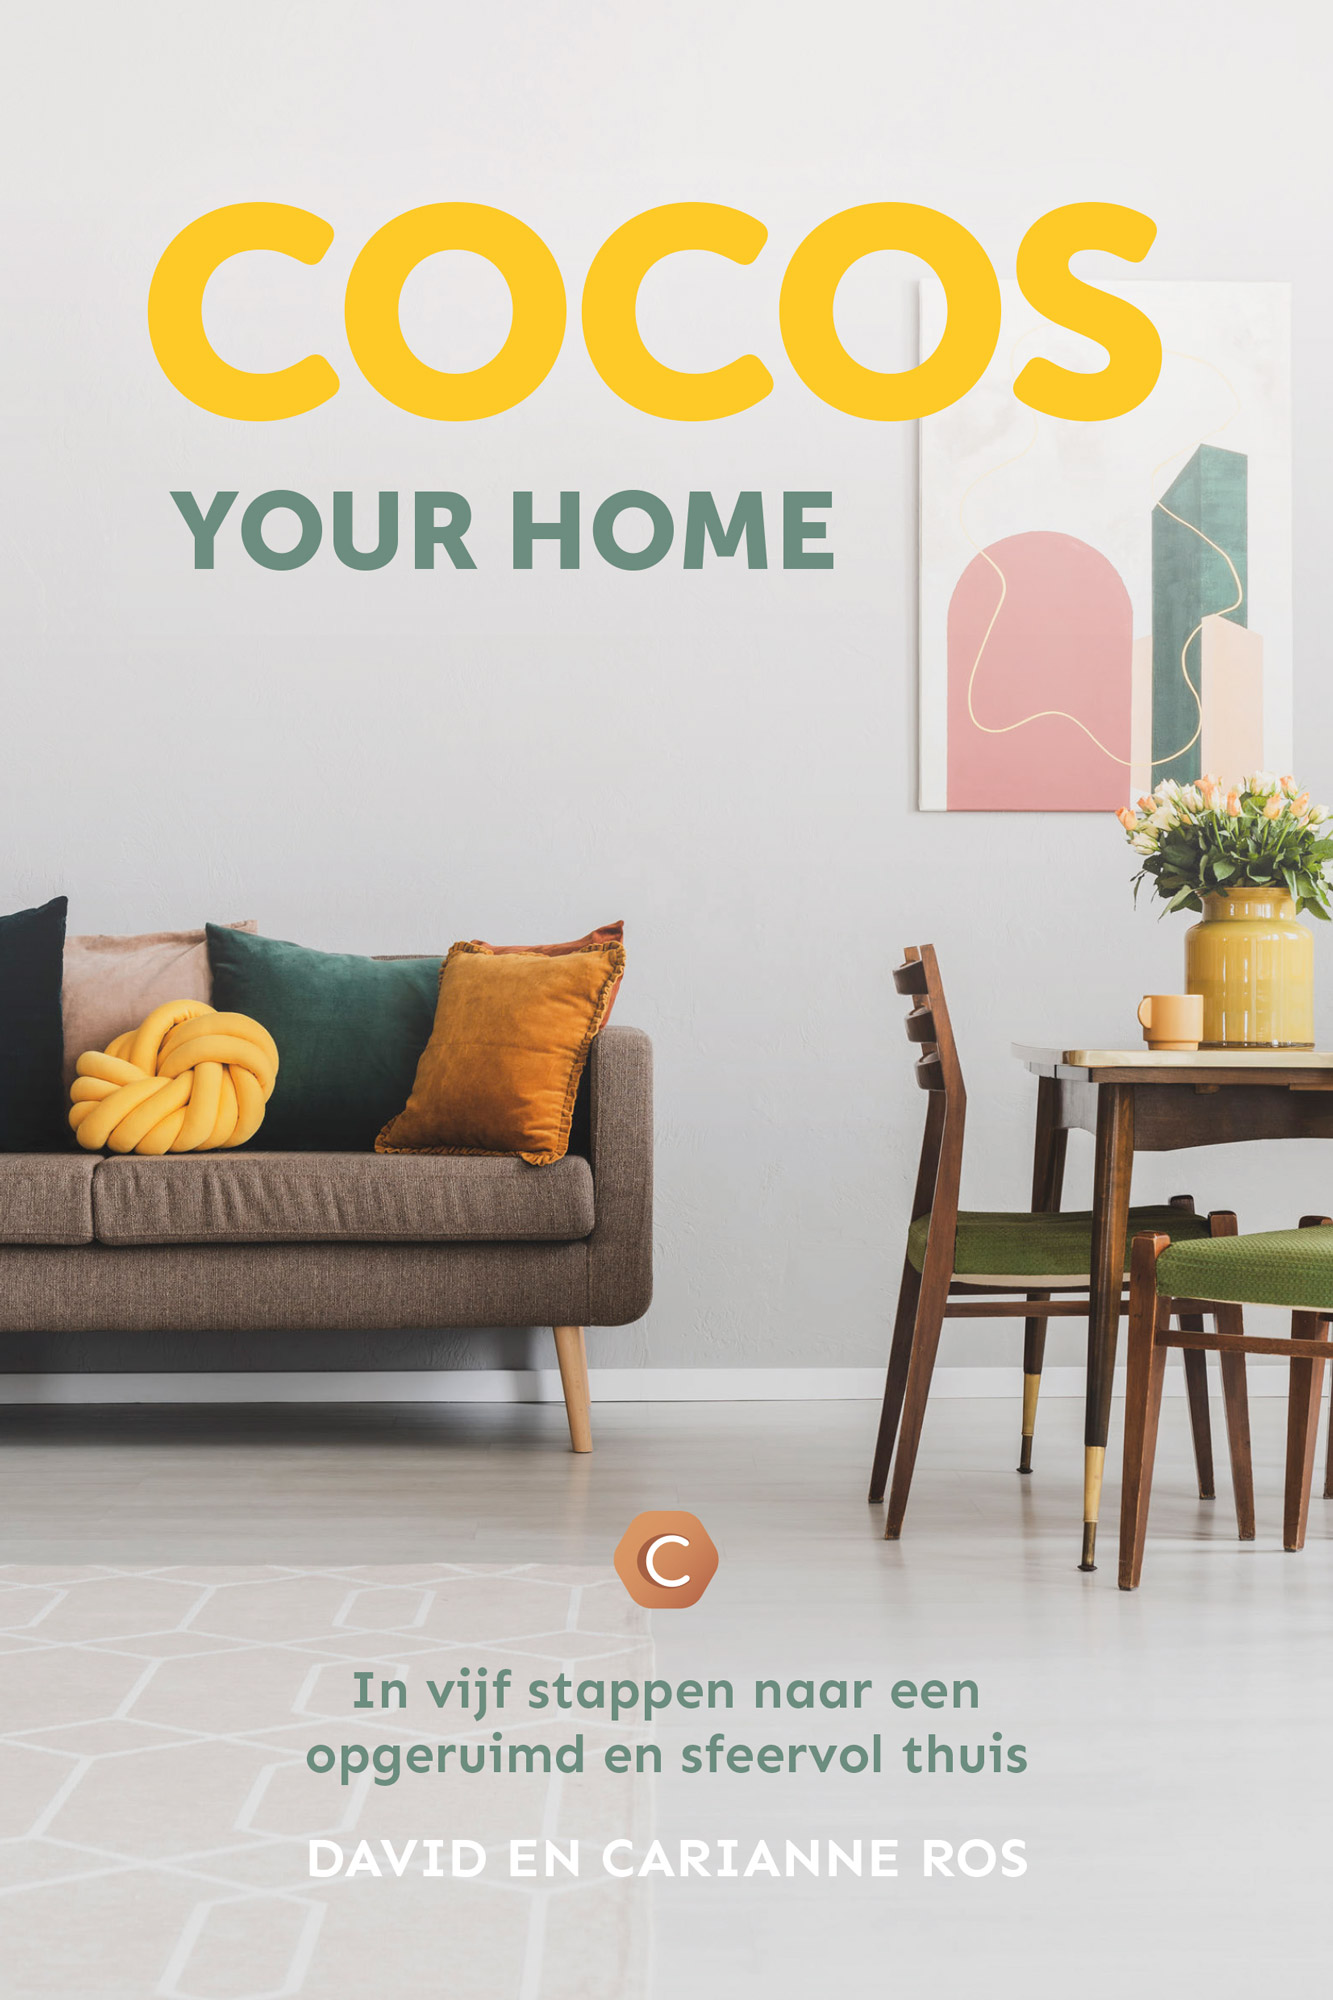 Cocos your home